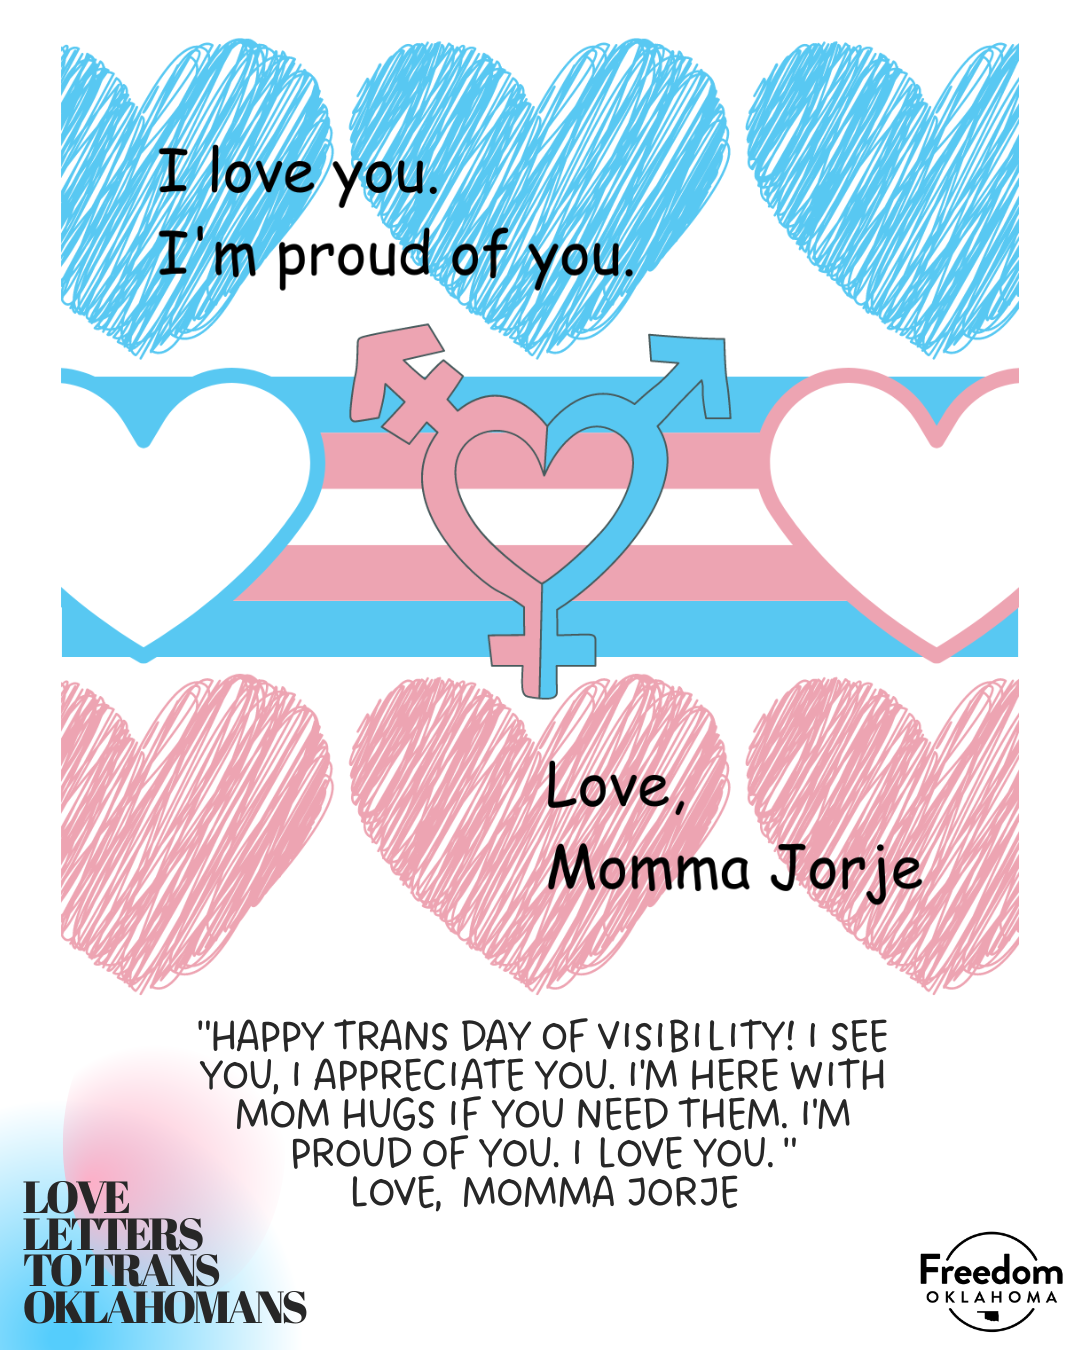  White background with "Love Letters to Trans Oklahomans" in the bottom left. Most of the image is an art submission: "Happy Trans Day of Visibility! I see you, I appreciate you. I'm here with Mom Hugs if you need them. I'm proud of you. I love you. 